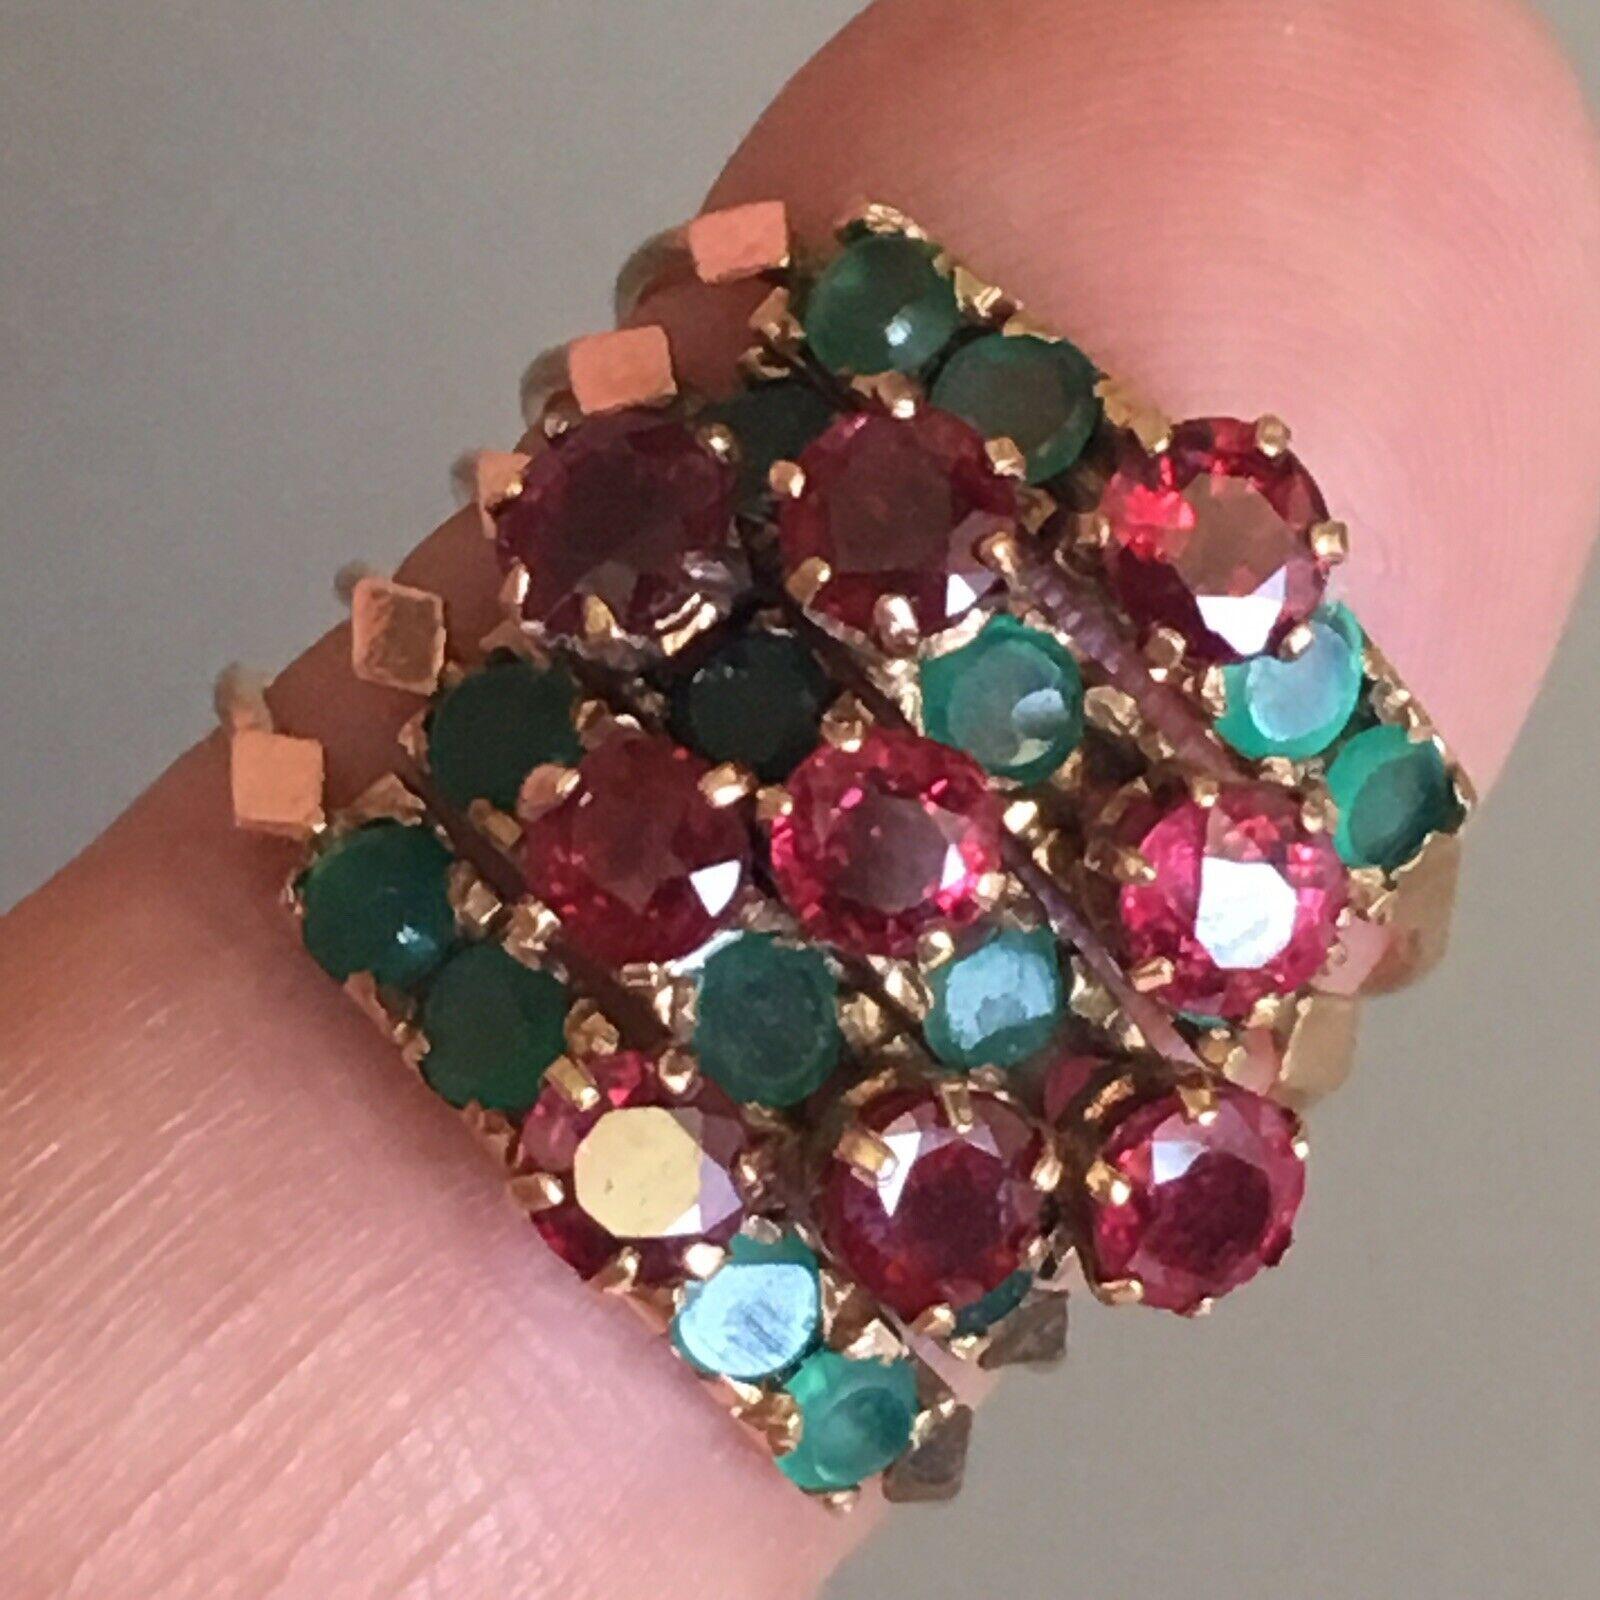 Victorian hallmarked circa 1880s gold Antique Multi Band ring
Burmese Ruby & Emerald
9 pieces of 4 mm natural round Burmese Rubies and 16 pieces of round 2.5 mm natural Emeralds
weighting 6.3 gram finger size 6 1/2

In perfect condition considering